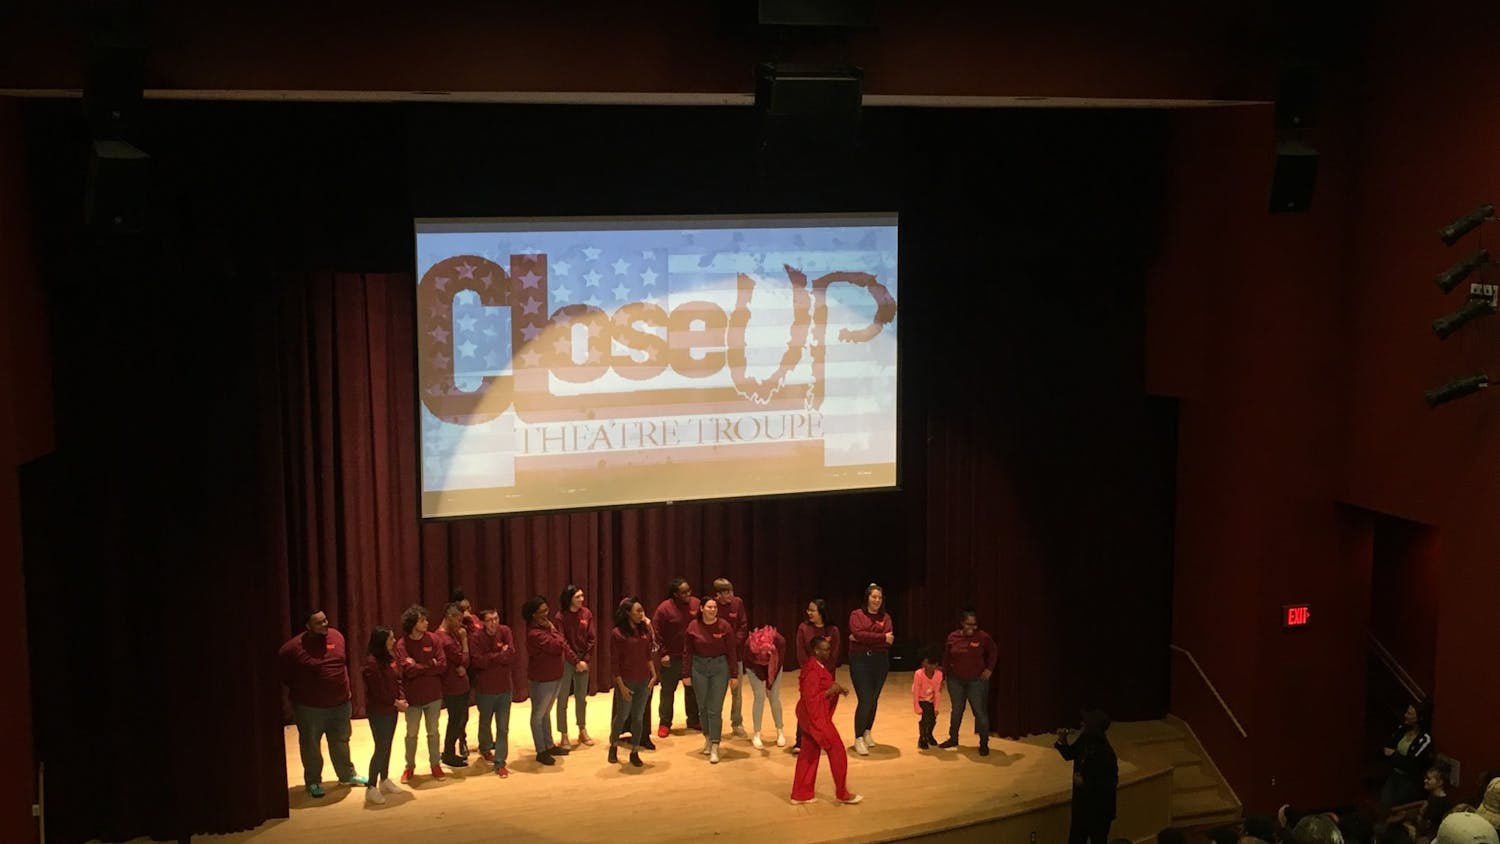 CloseUp Theatre performs as part of the MLK 2020 Celebration